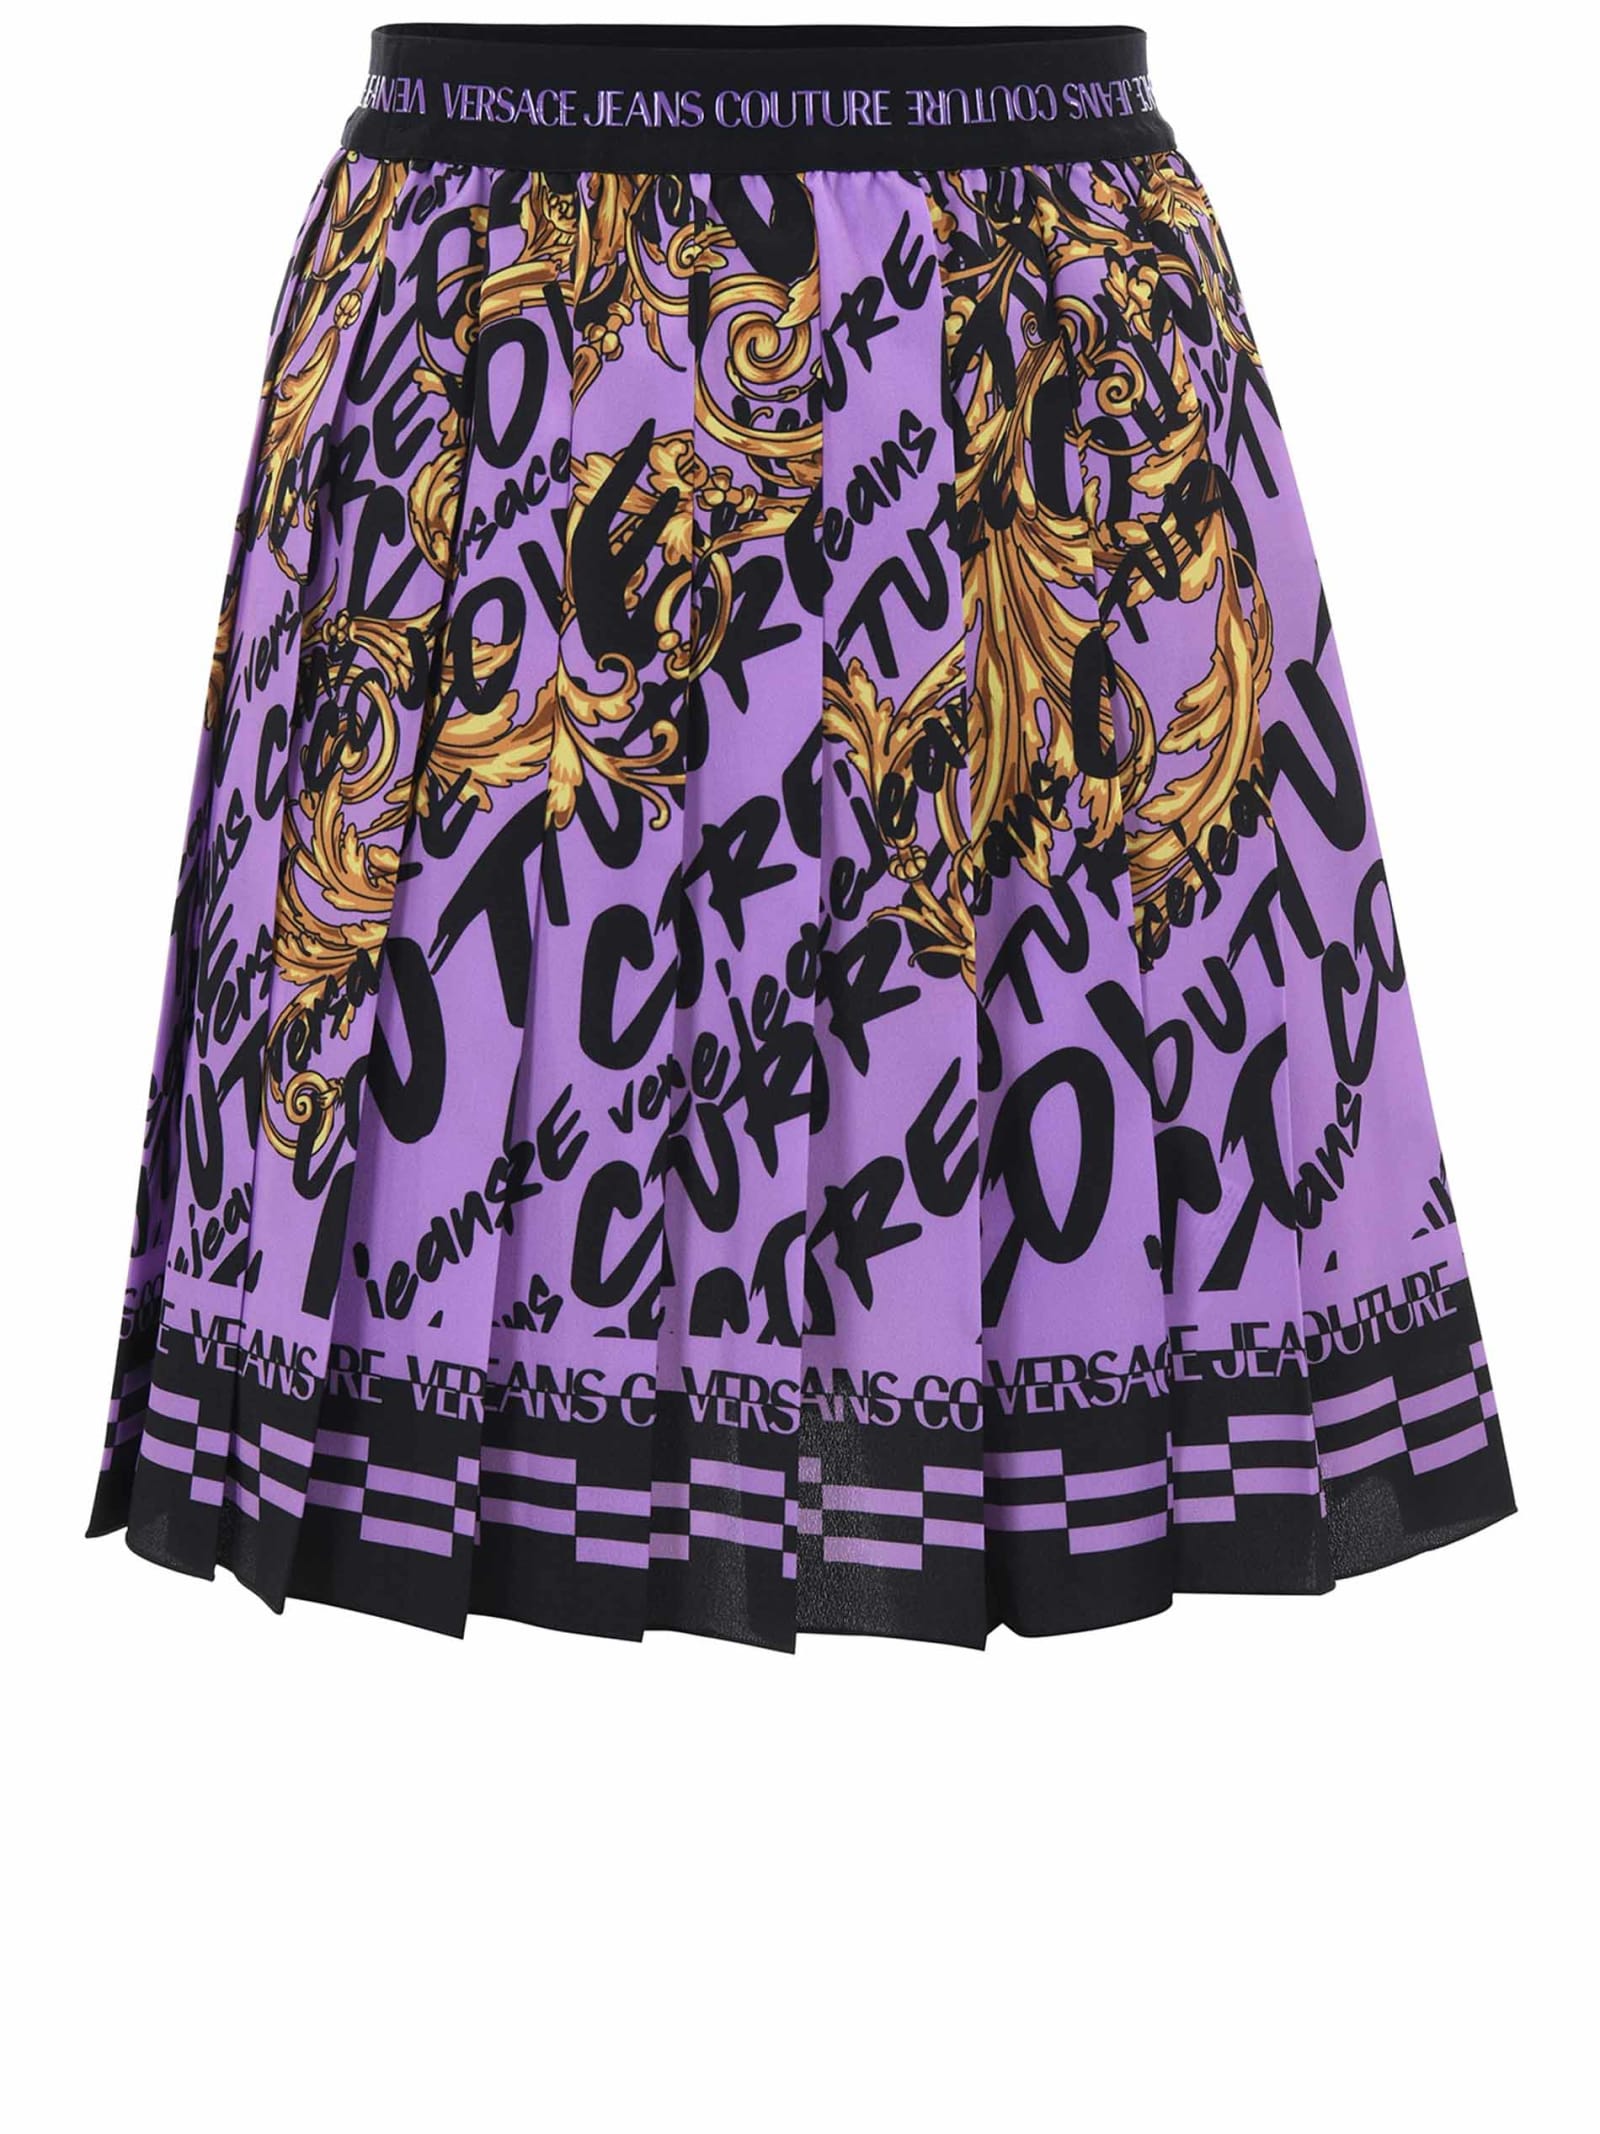 Versace Jeans Couture Satin Skirt